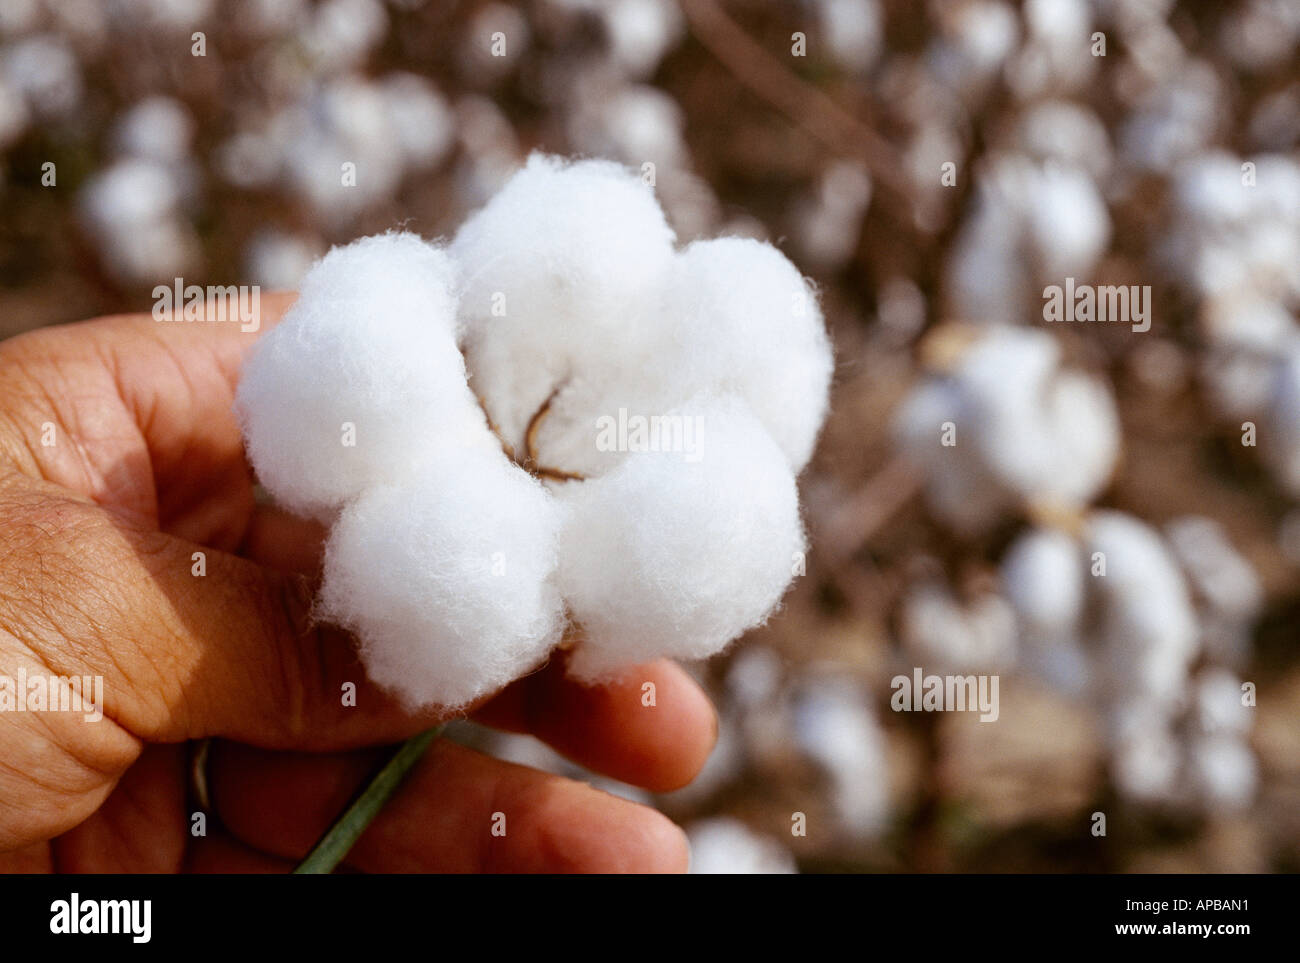 Agriculture / A farmer's hand holds a fully opened harvest stage 5-lock cotton boll / Mississippi, USA. Stock Photo